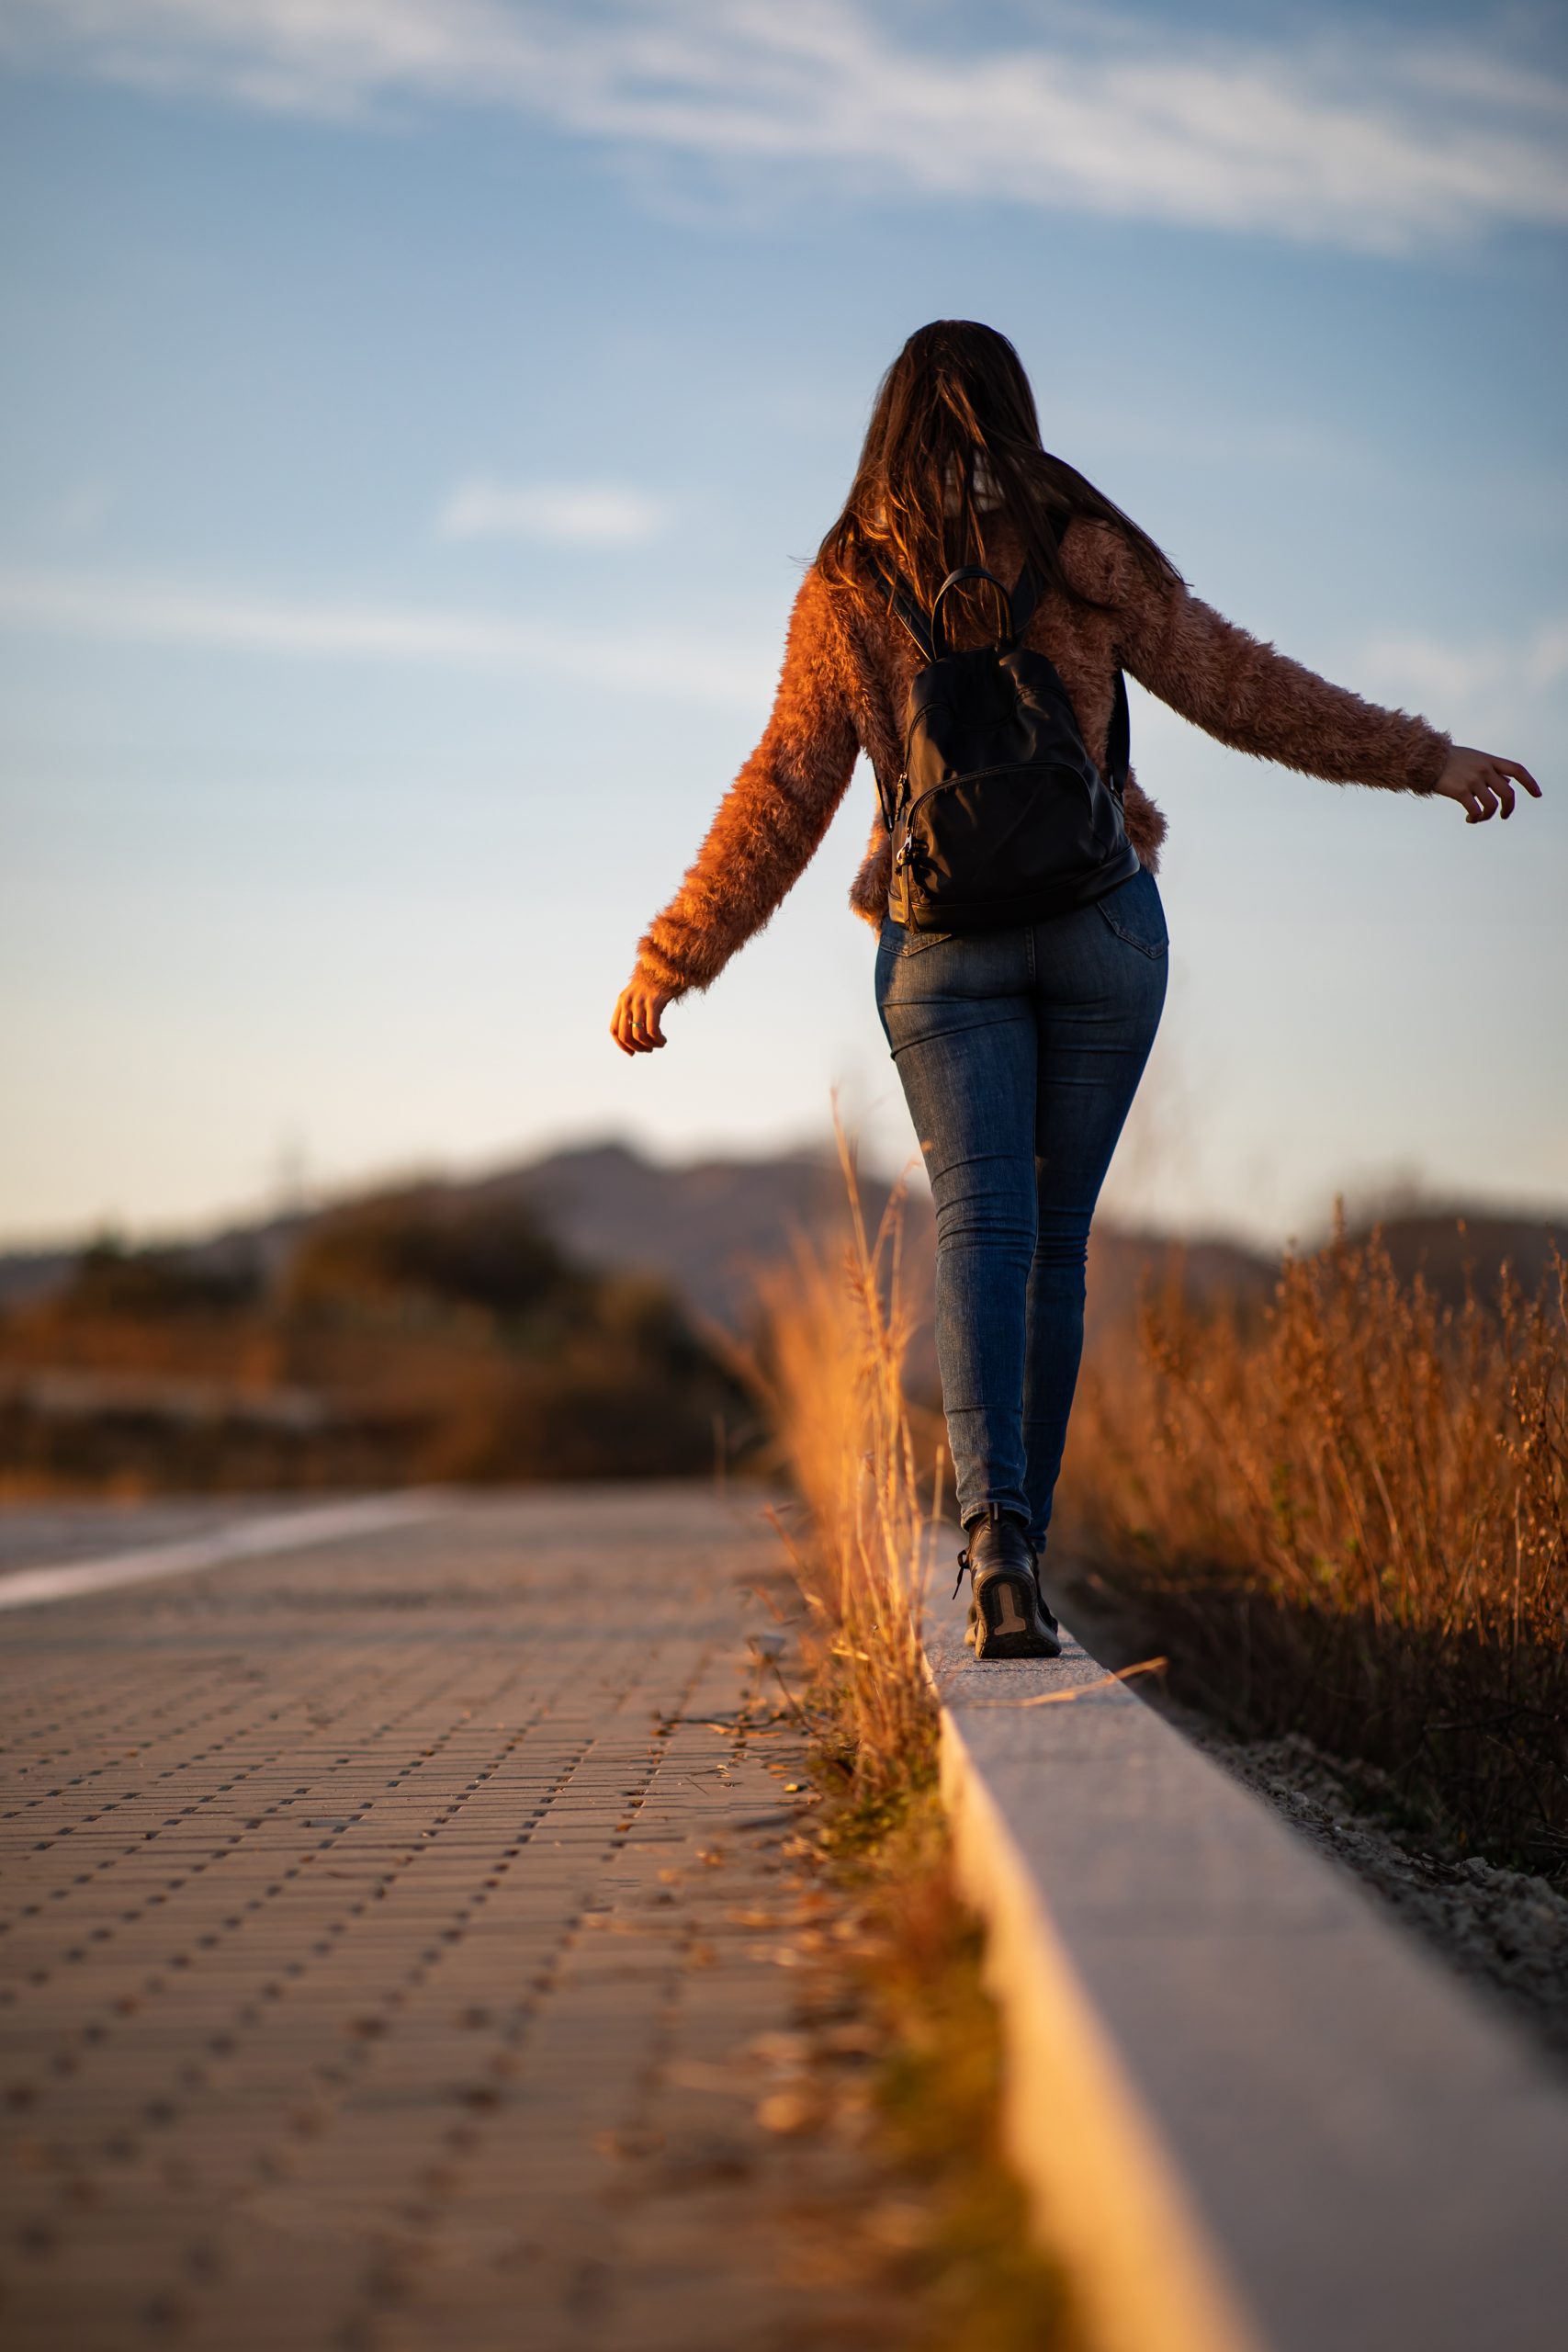 woman walking and balancing on street curb or curbstone during sunset